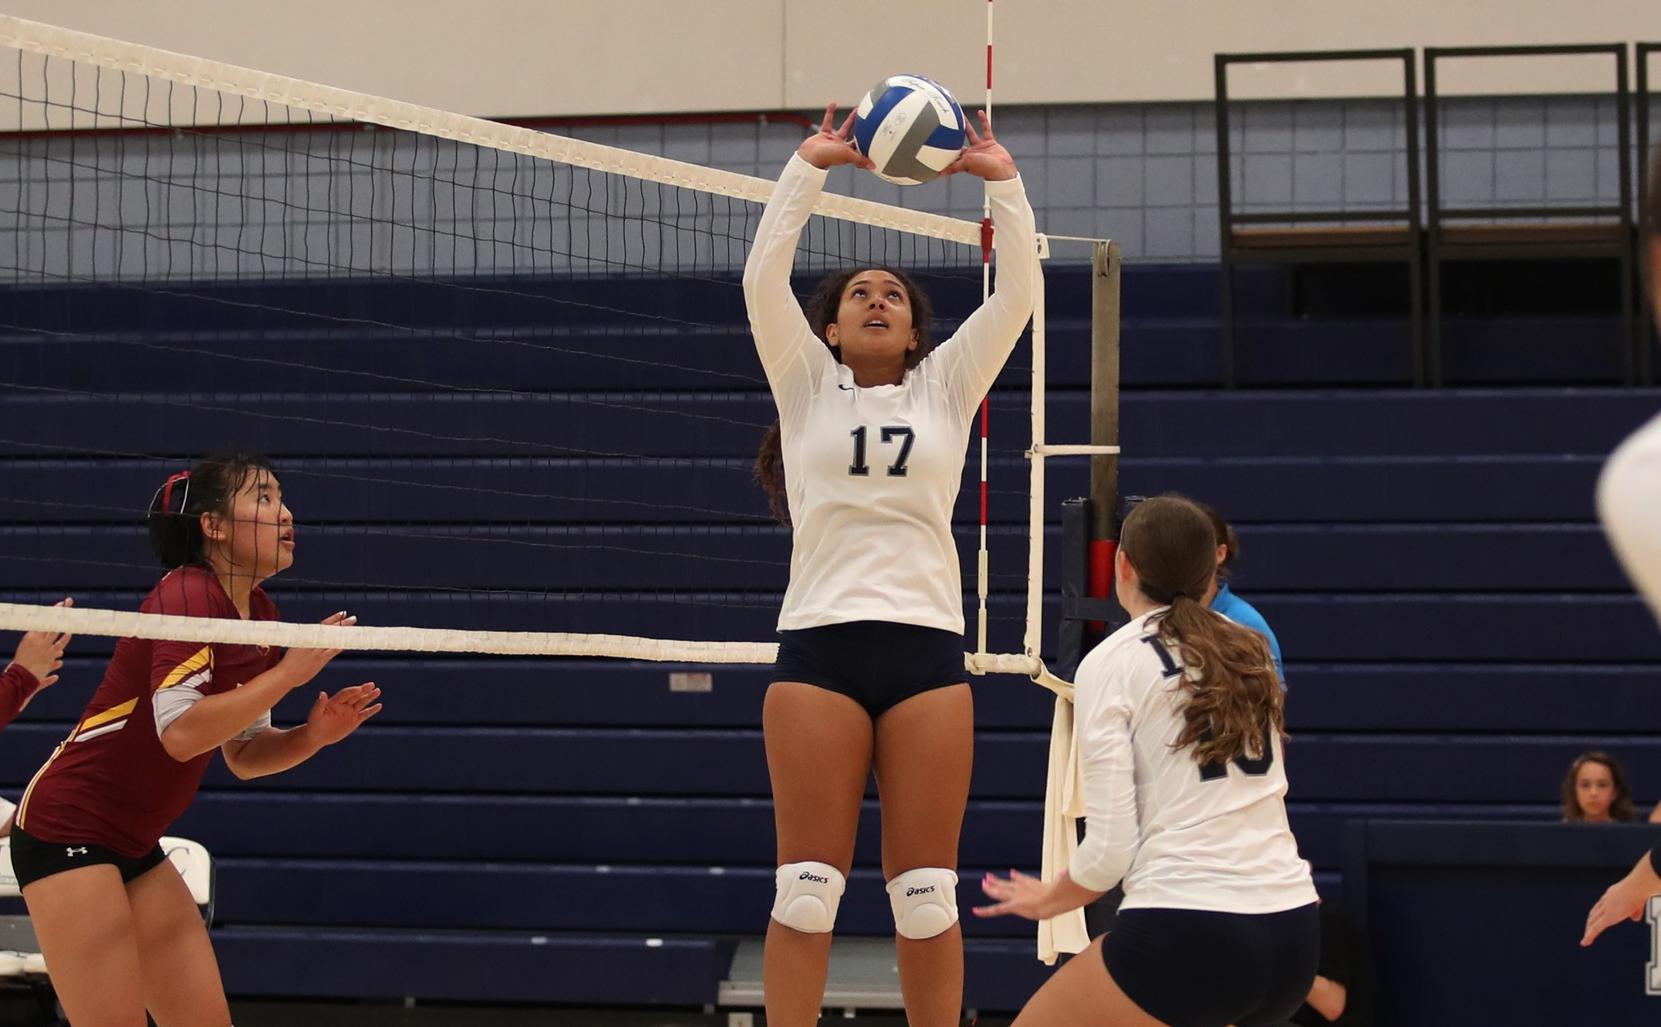 Women's volleyball team sweeps Canyons, Unke nabs first win